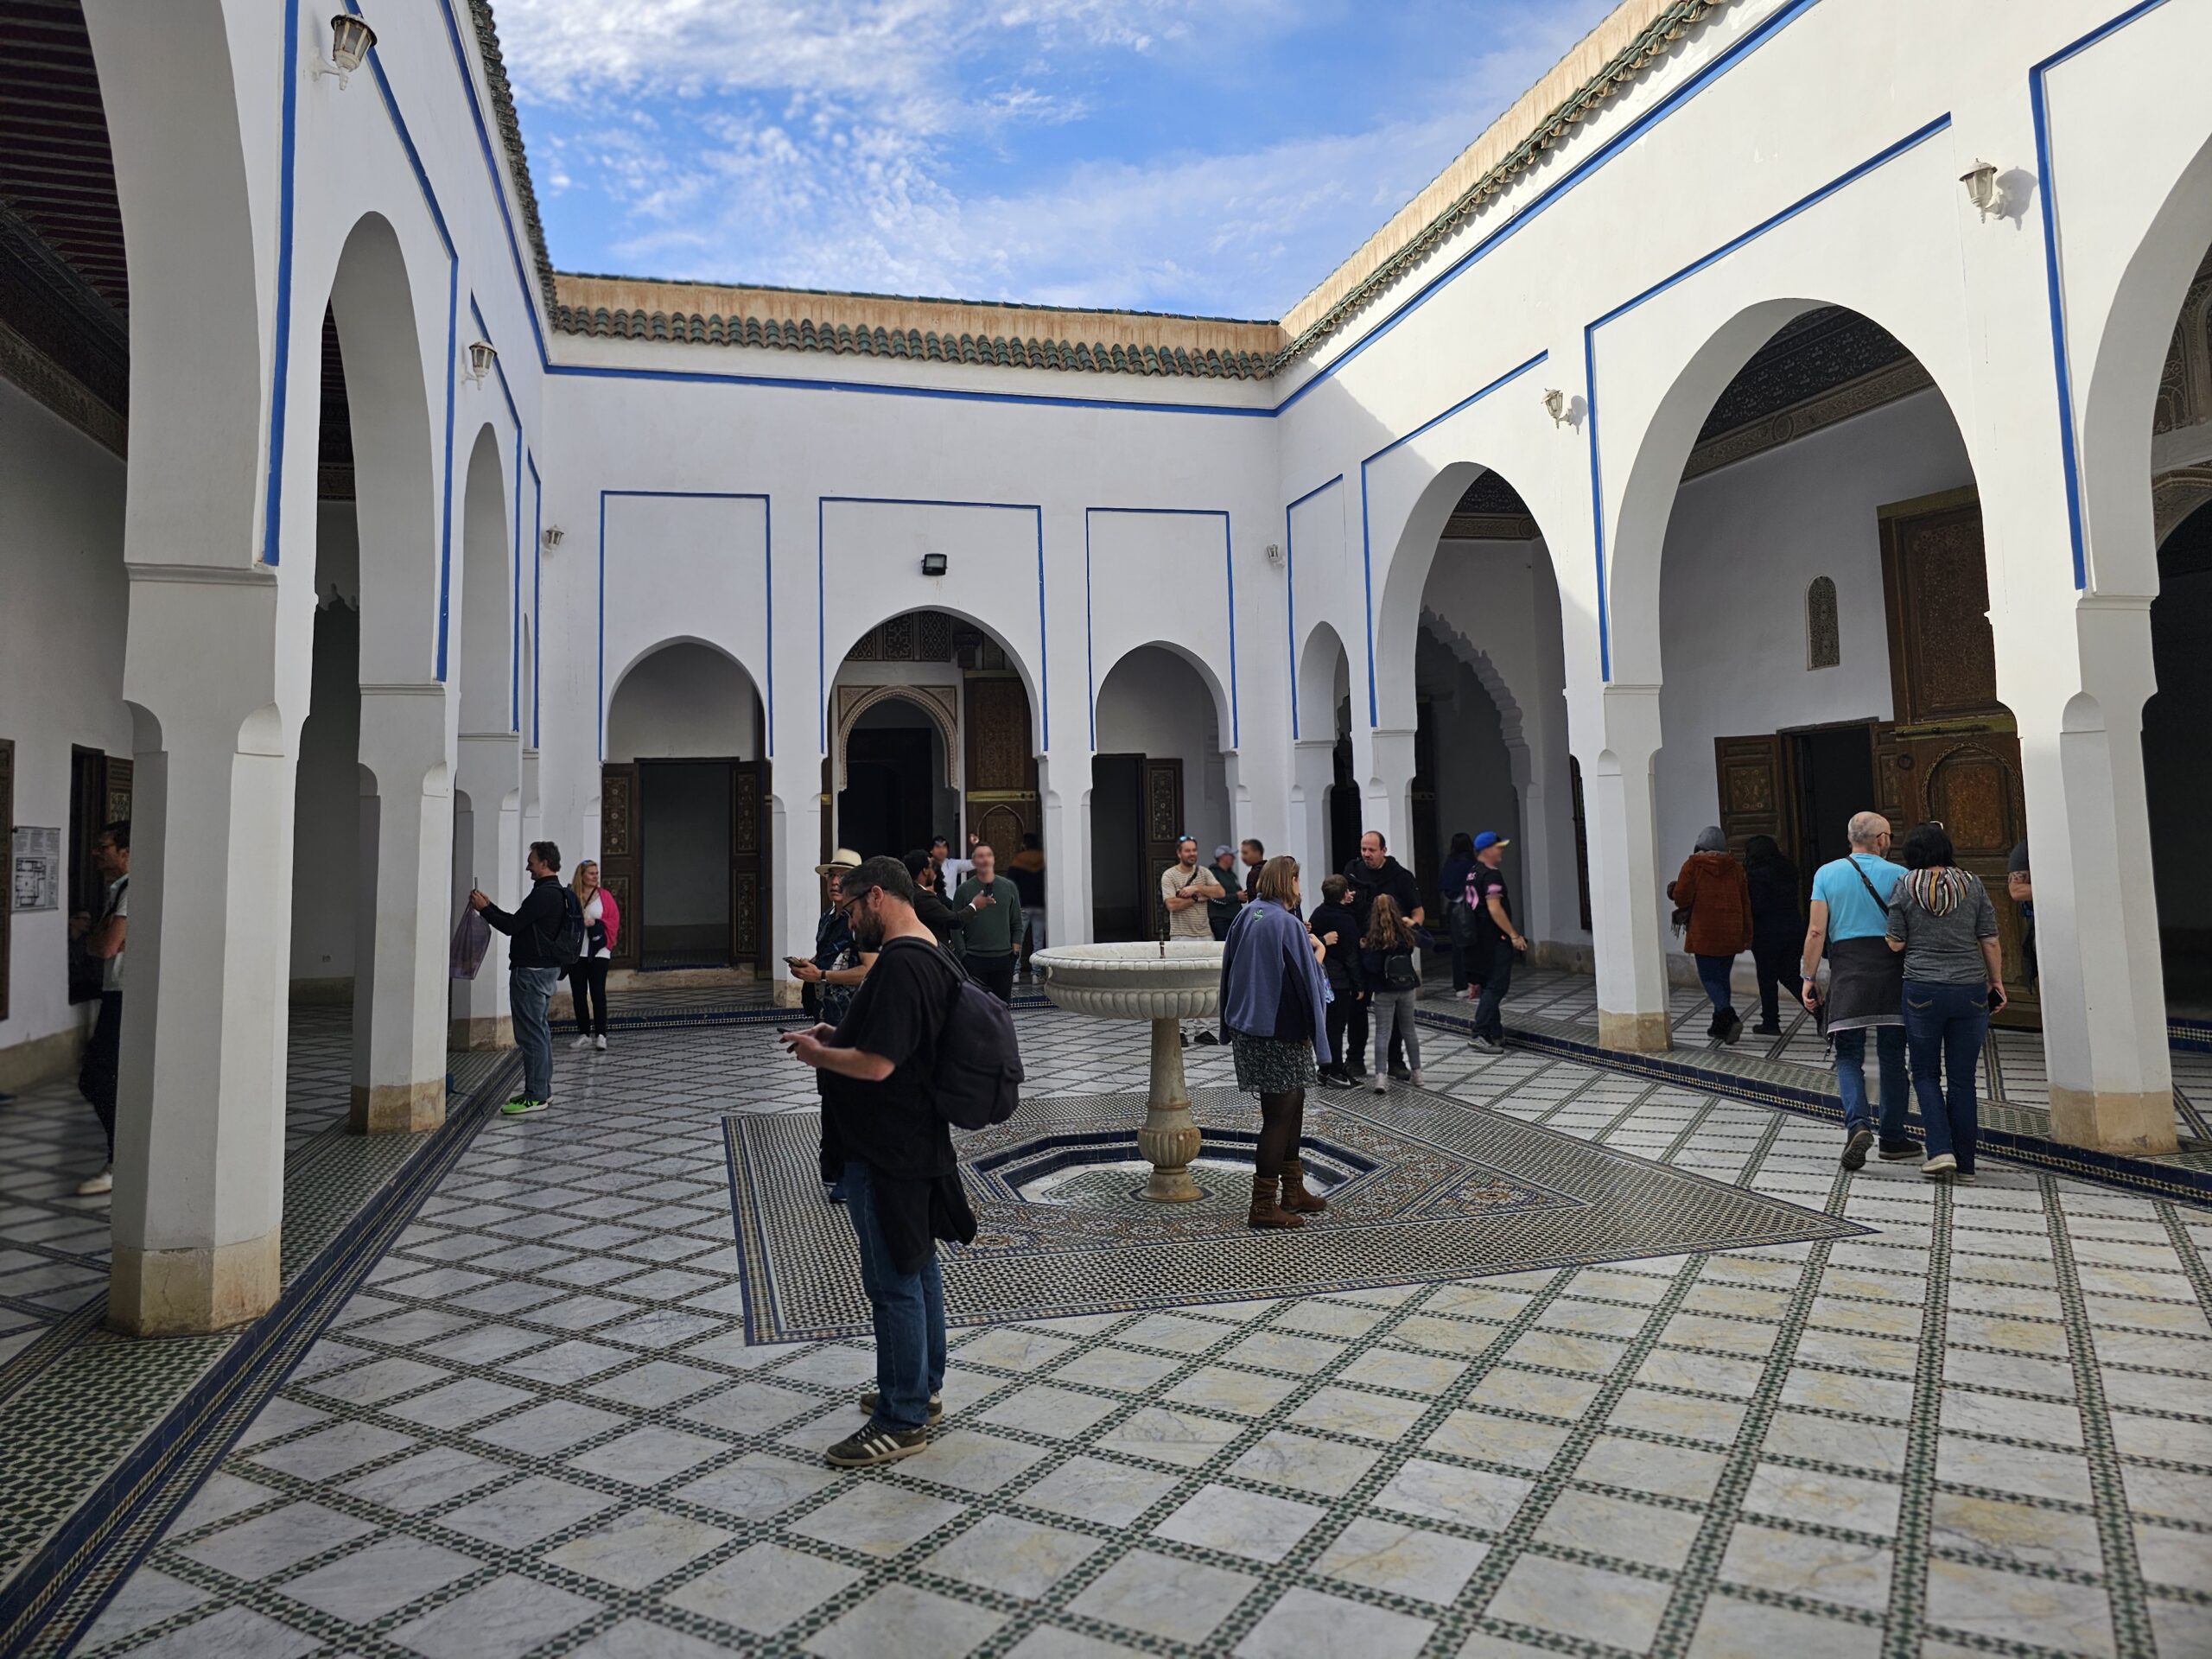 A smaller courtyard at Bahia Palace, Marrakesh, with people milling around. Image by 360onhistory.com